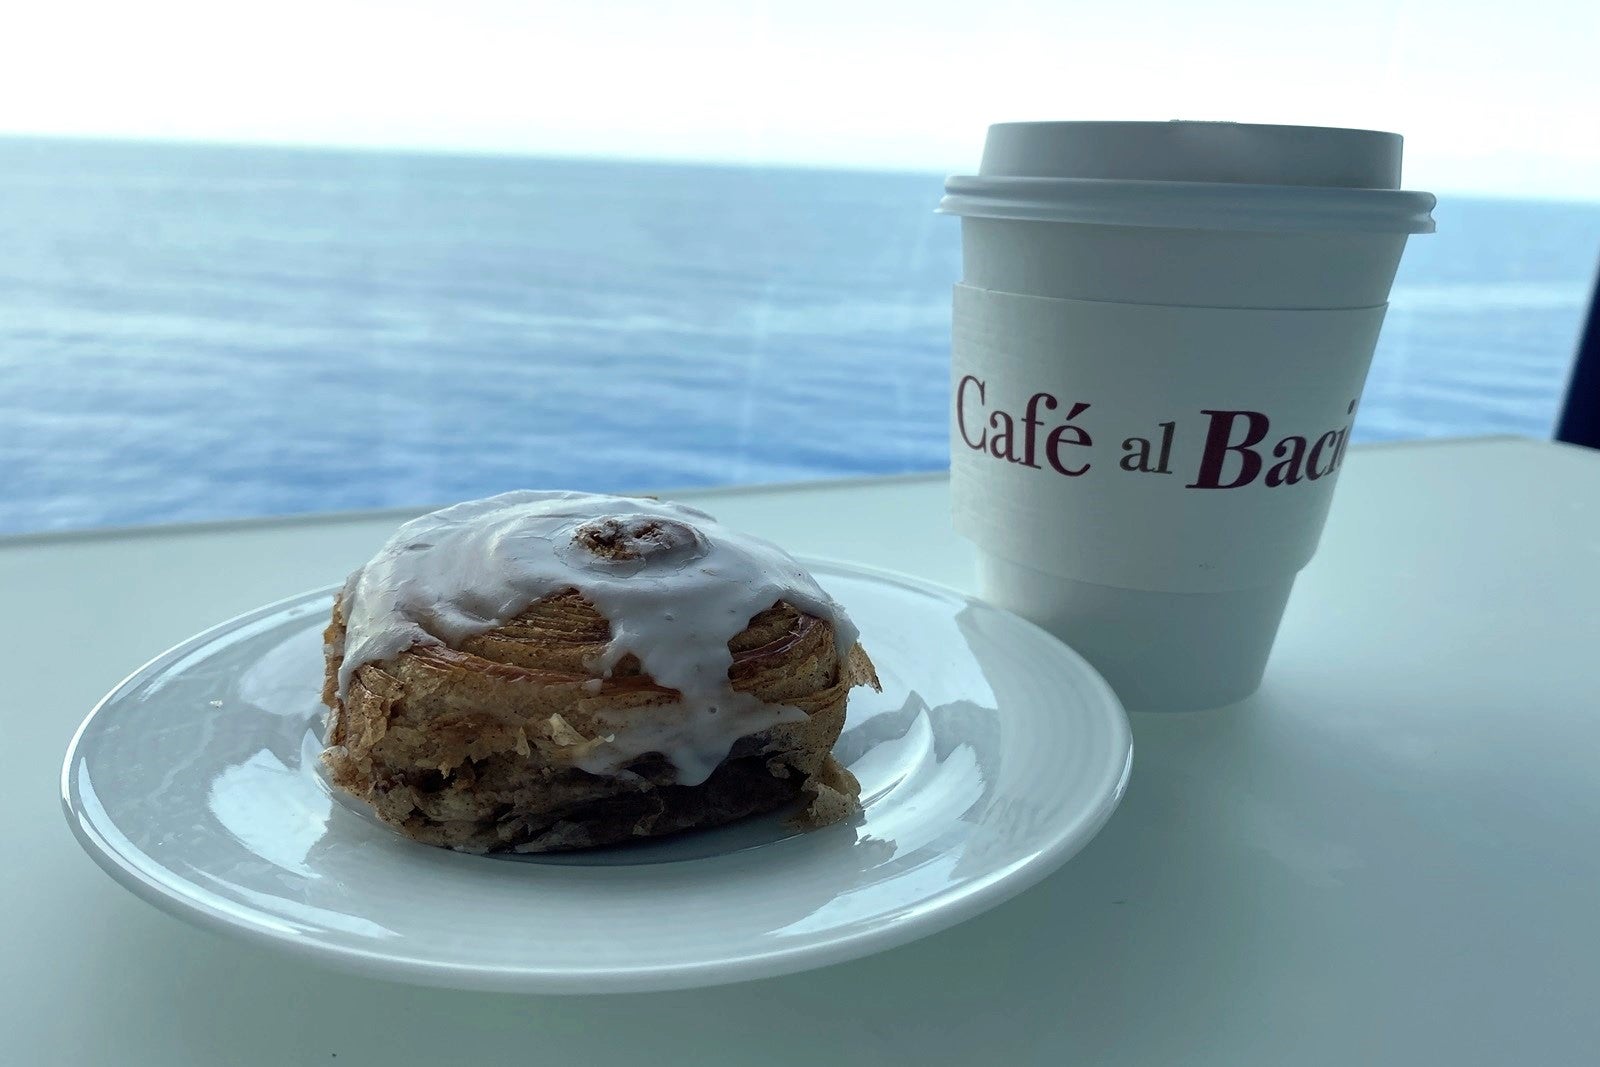 A pastry on a dish and a cup of to-go coffee on a table in front of the water on a cruise ship balcony